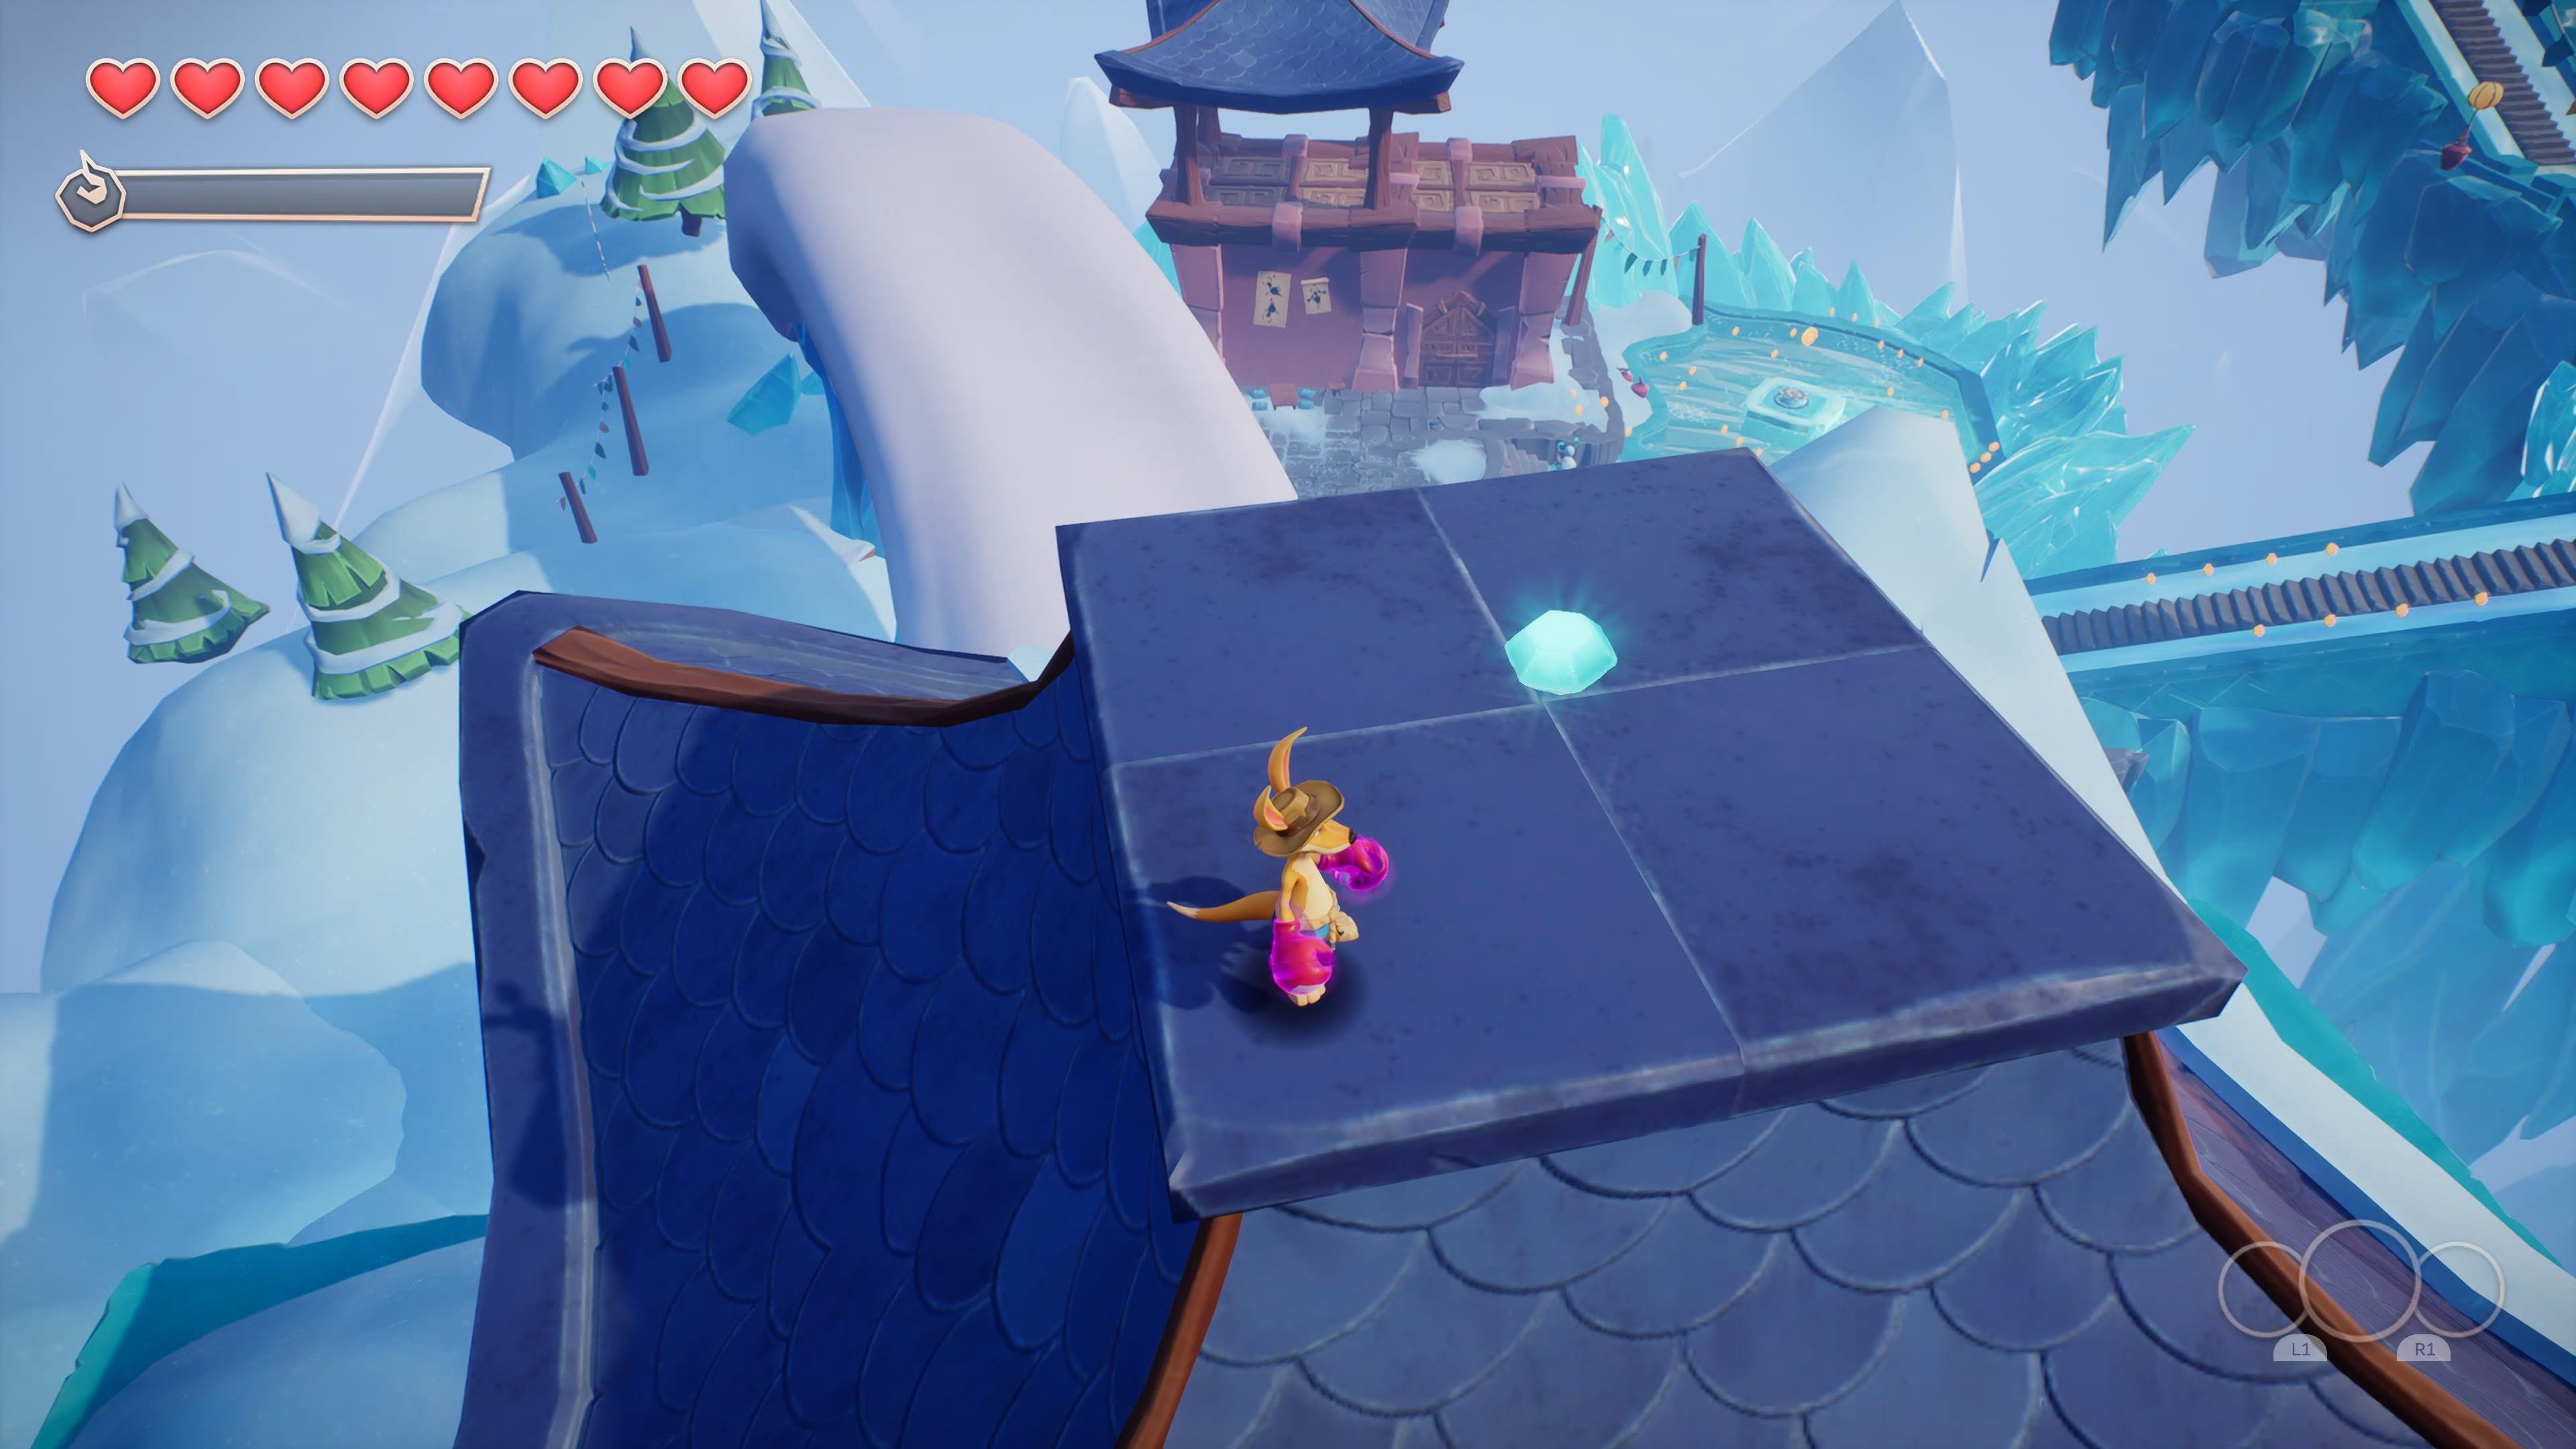 The Frozen Mountain's rooftop crystal